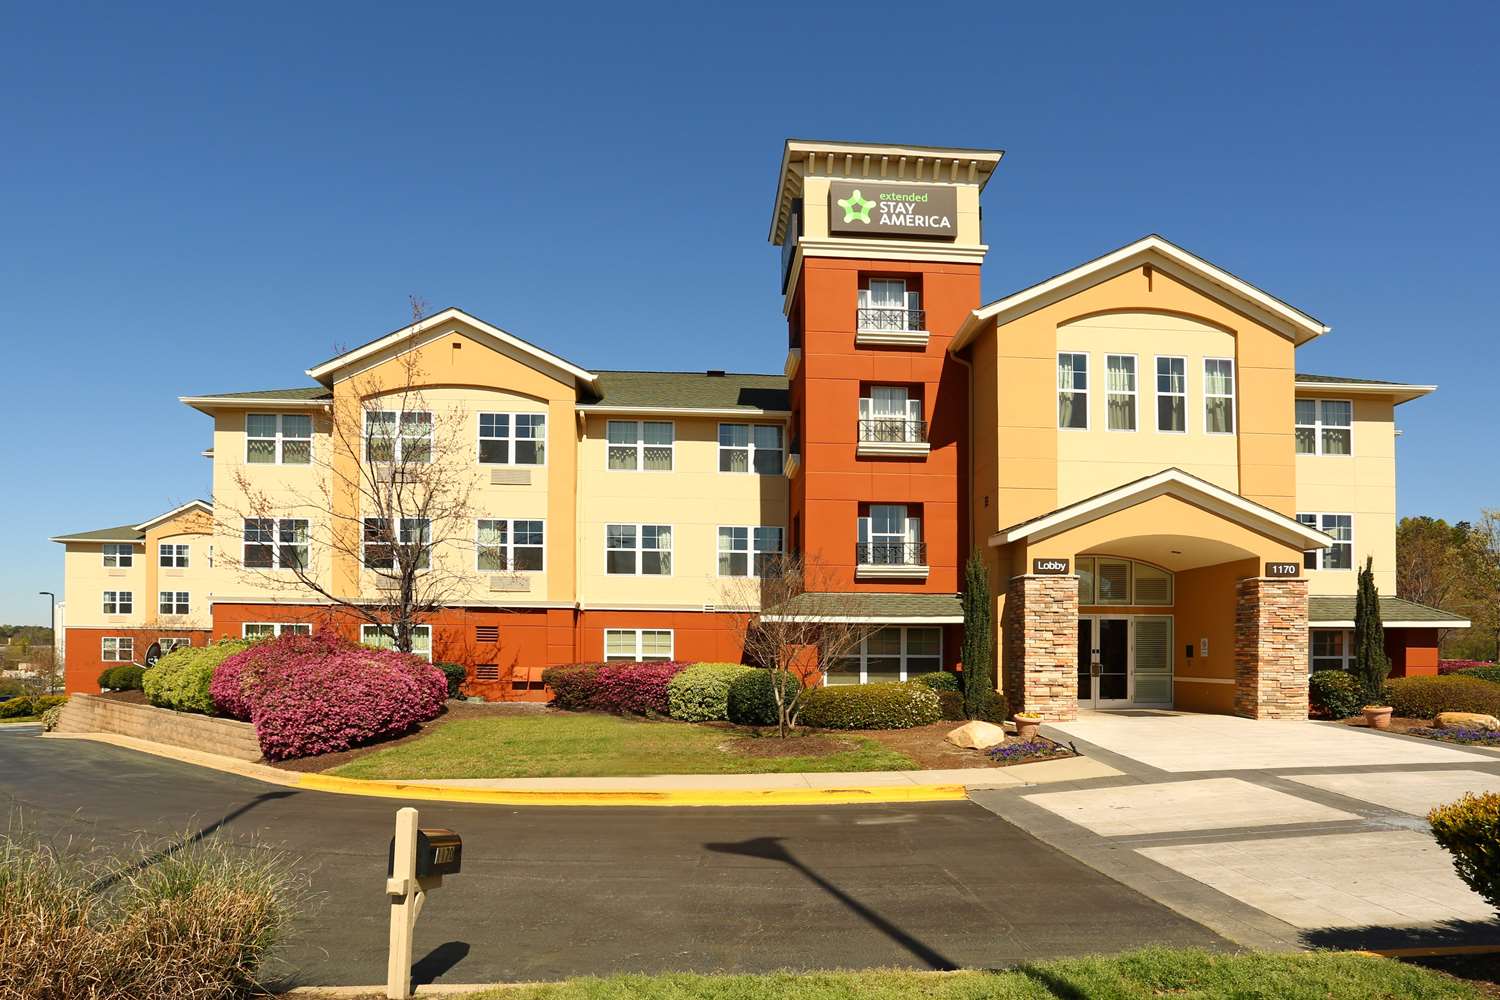 Pet Friendly Extended Stay America - Columbia - Northwest - harbison in Irmo, South Carolina